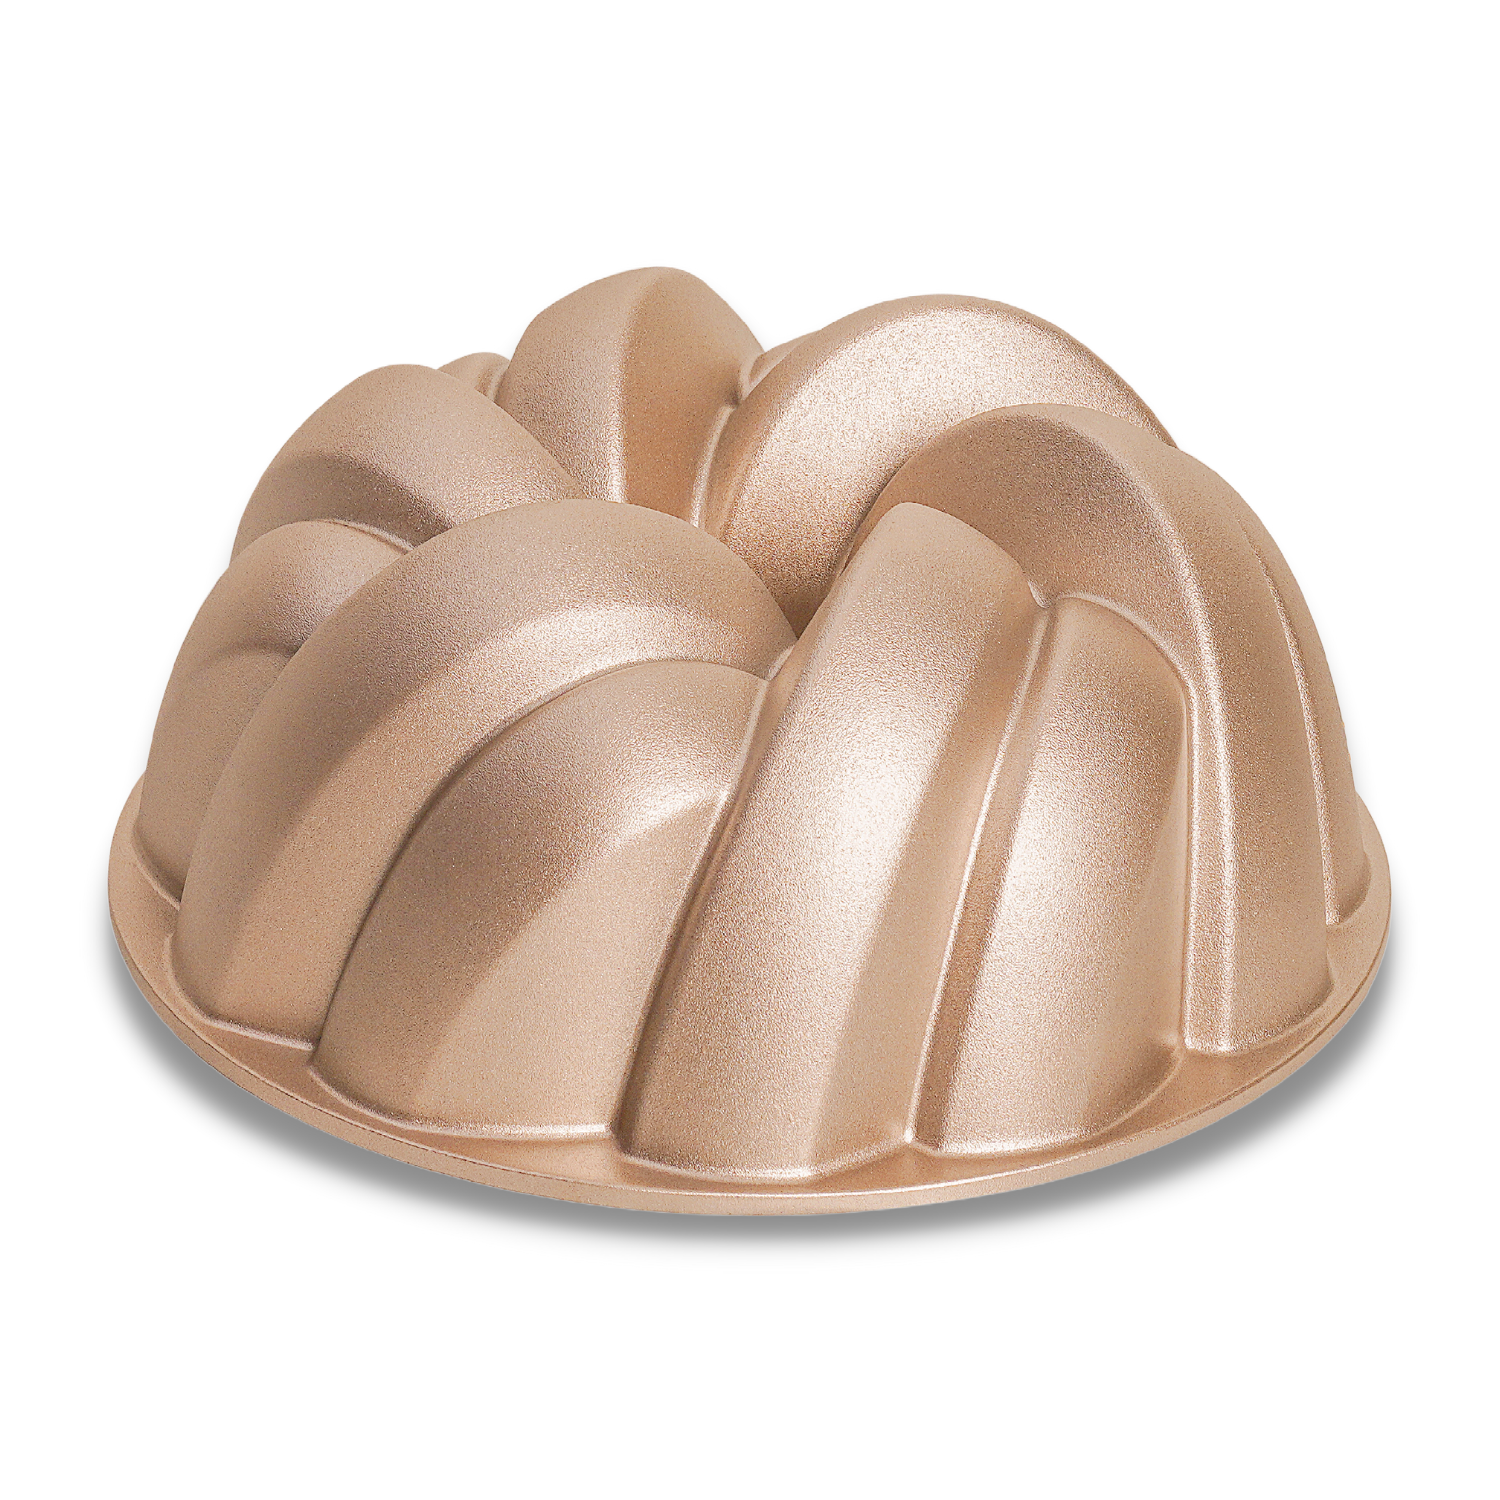 Silicone Bundt Cake Pan, Non-stick Bundt Pan with Sturdy Handle